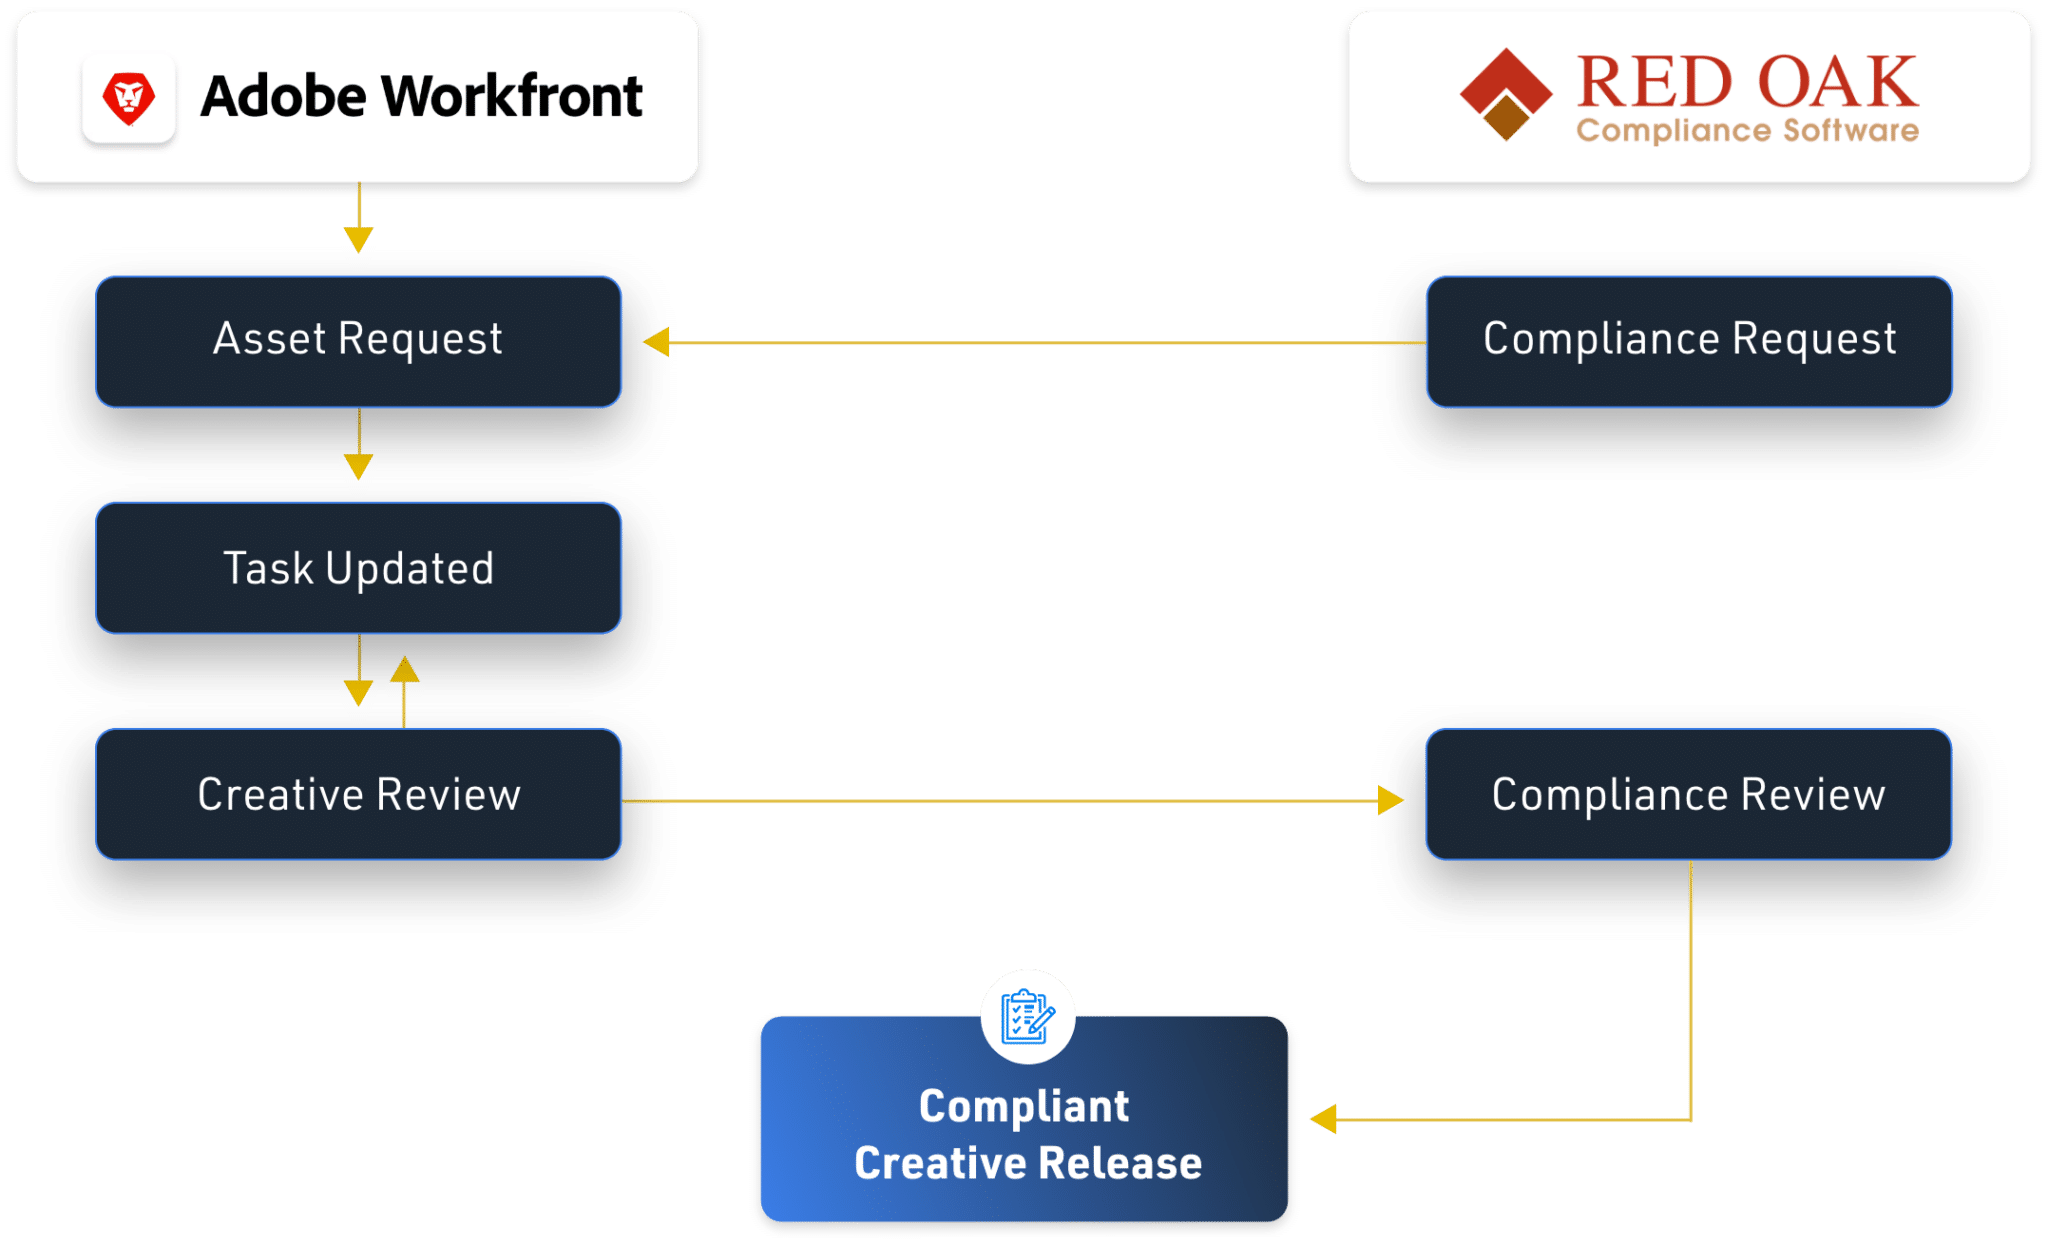 Adobe Workfront and Red Oak Compliance Software compliant creative release diagram